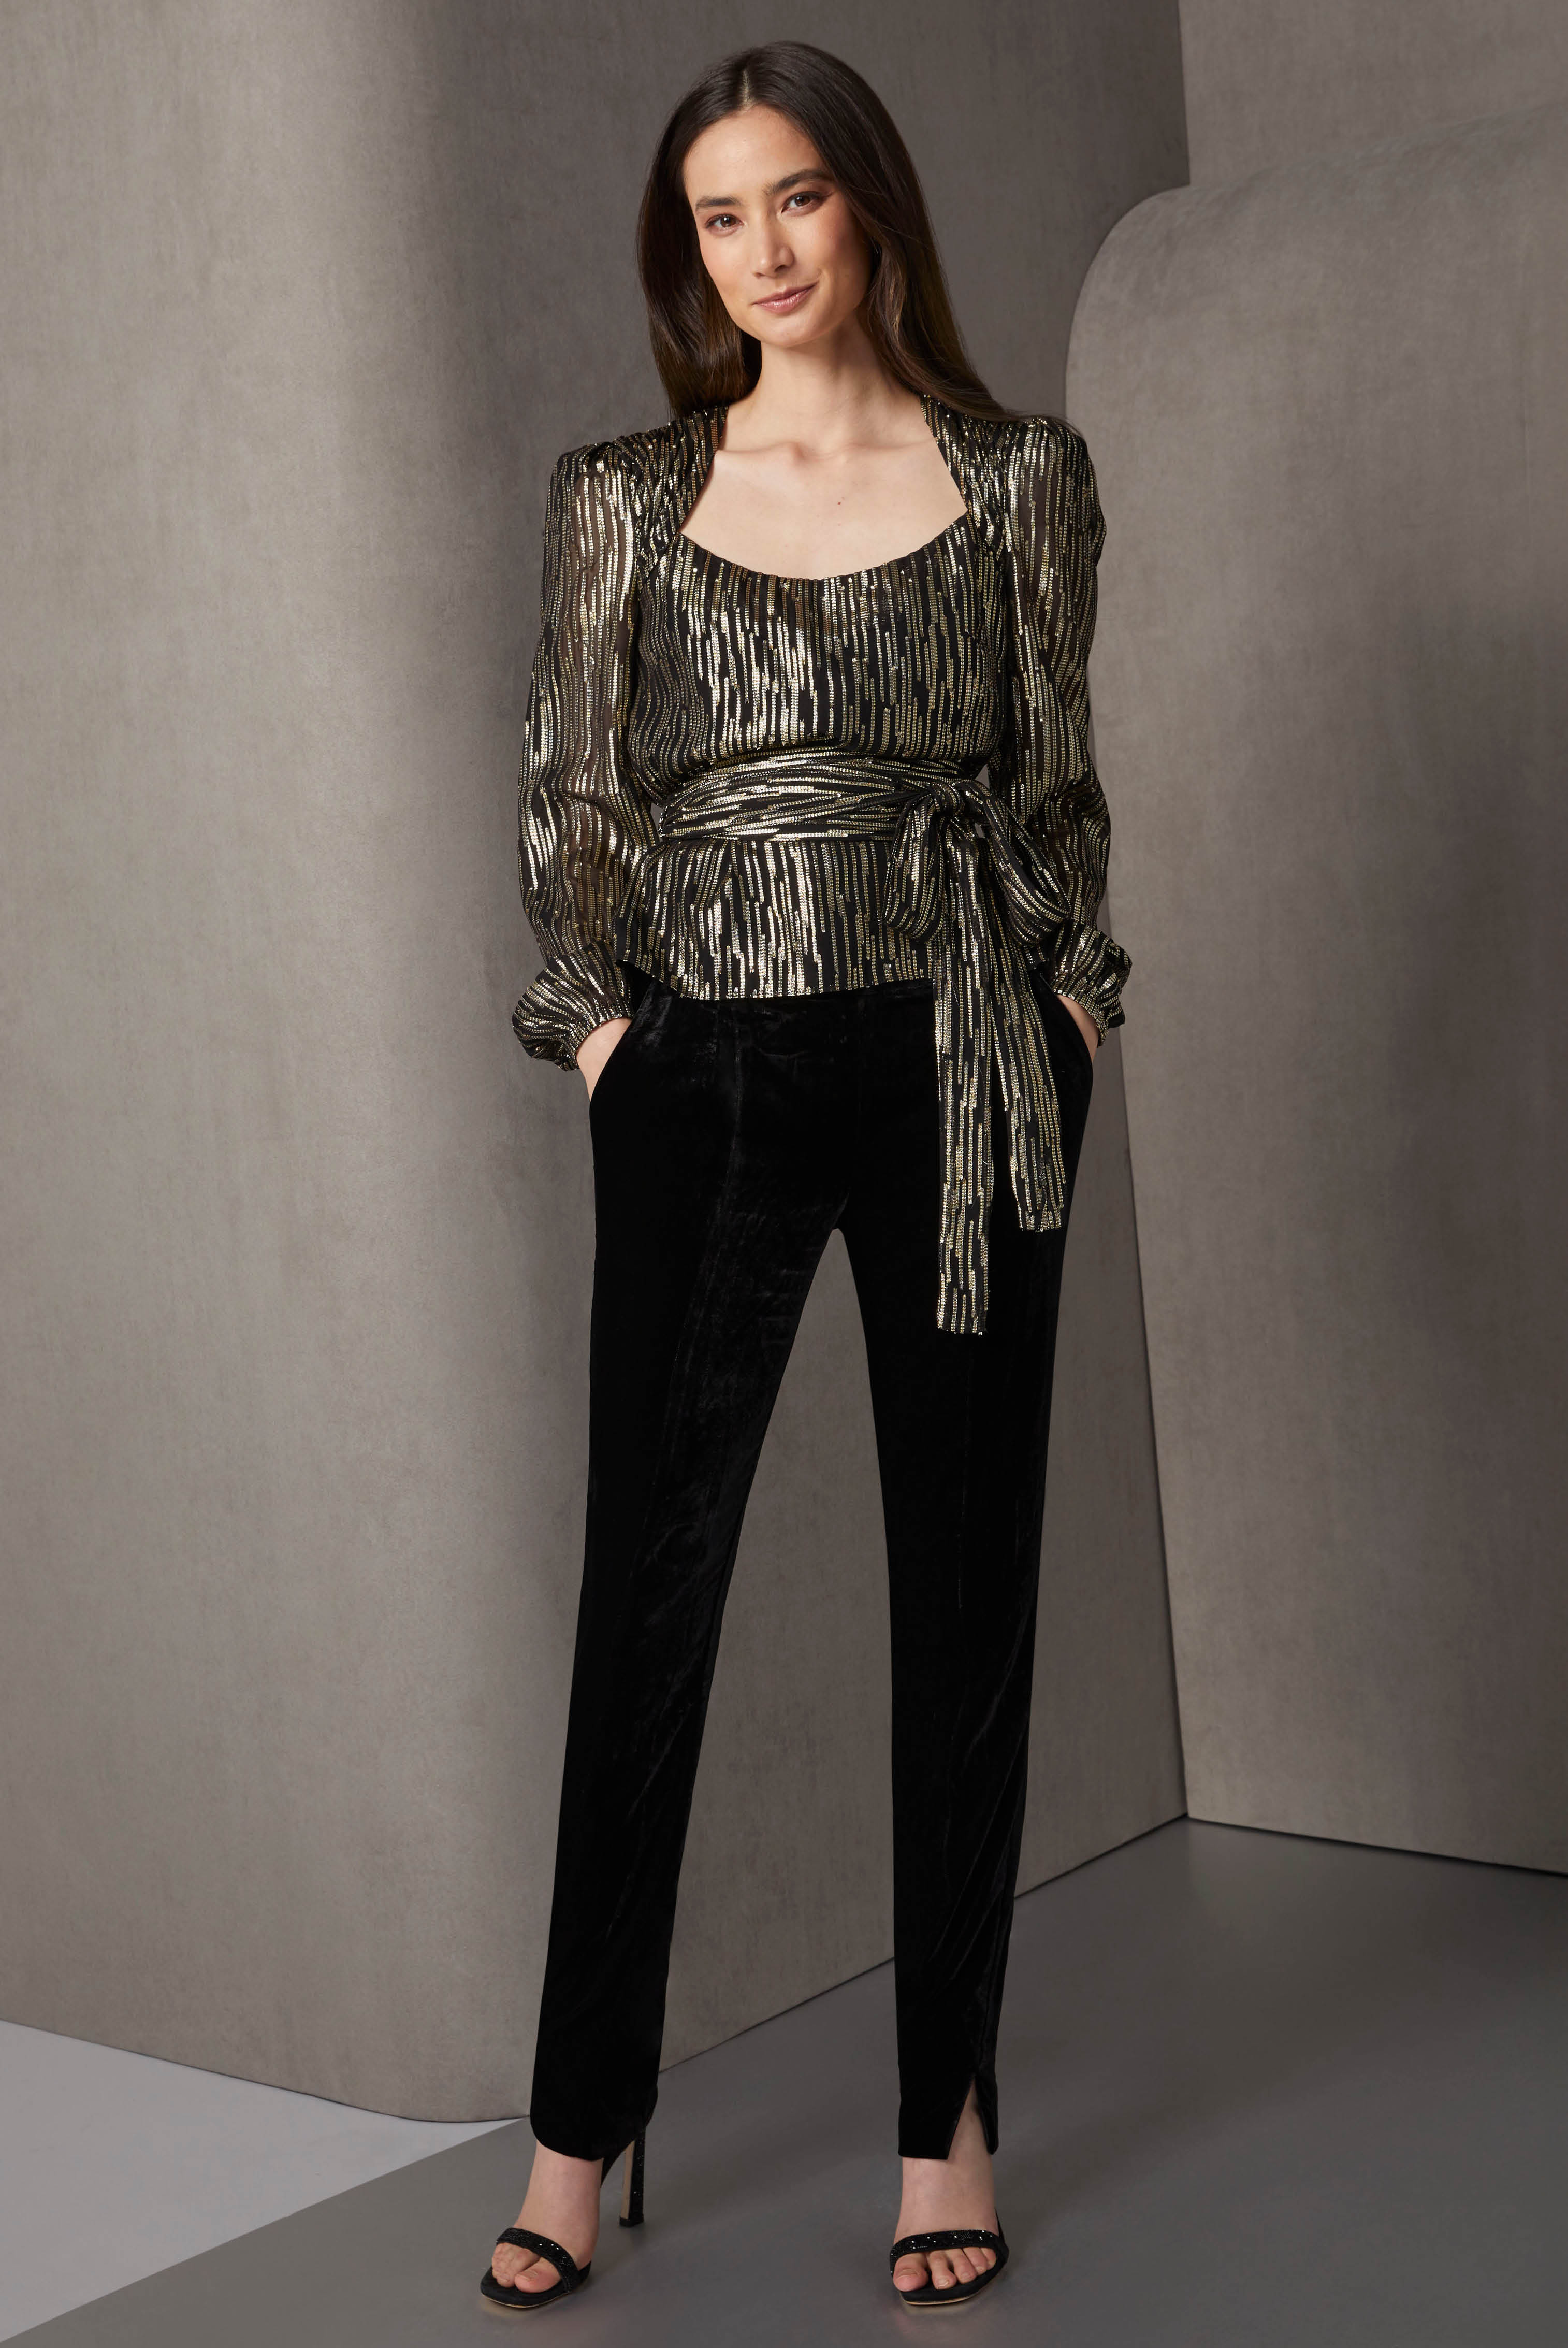 This elegant pants ensemble adroitly combines glamour with wearability. The sparkling fil coupé evening blouse with gold stripe motifs has a portrait neck, gathered shoulders, and elasticized puff sleeves.